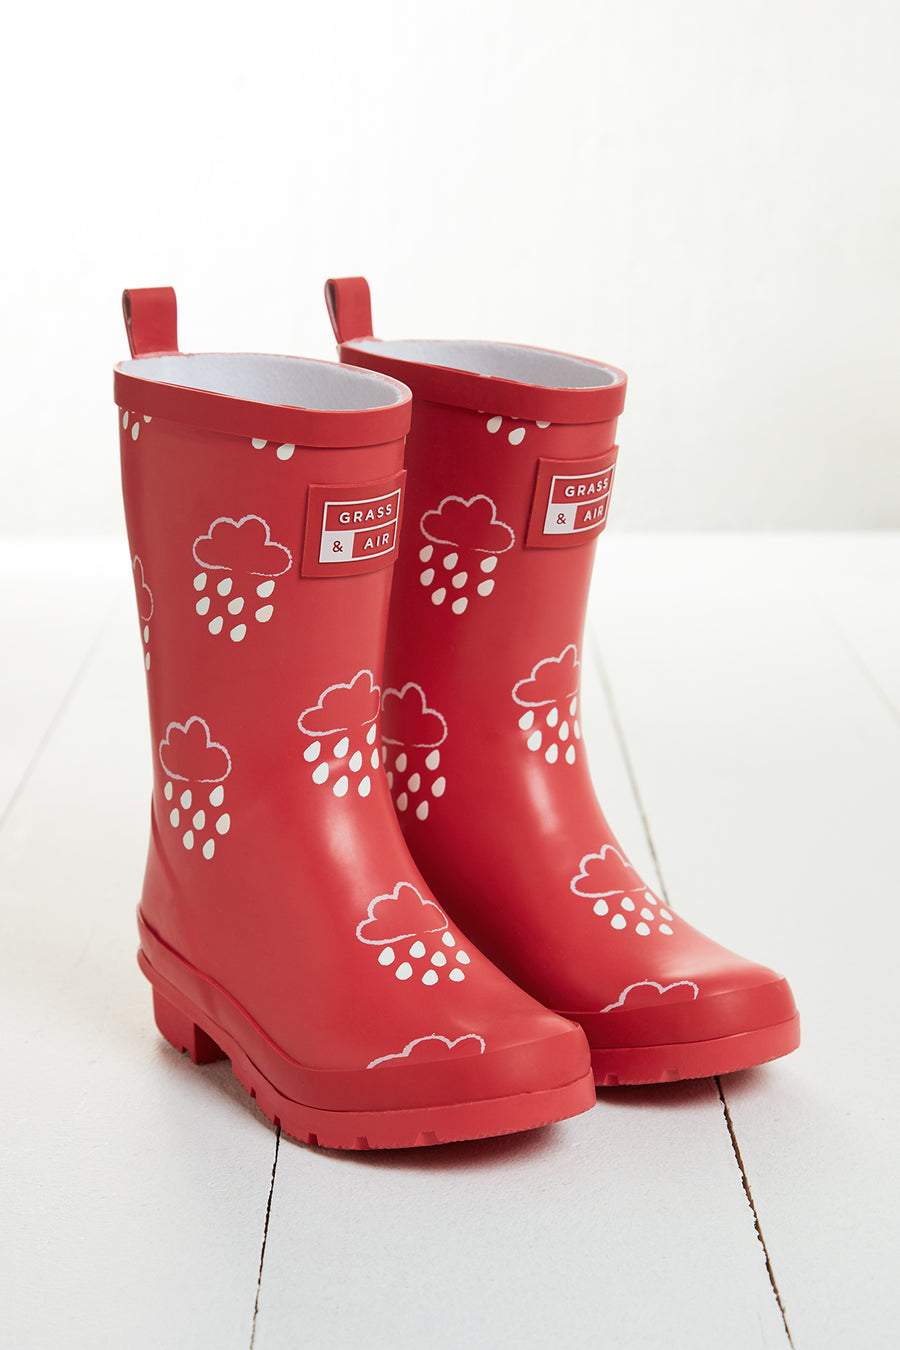 Grass and Air |Junior Wellies | Colour Changing |Dark Coral (Red)